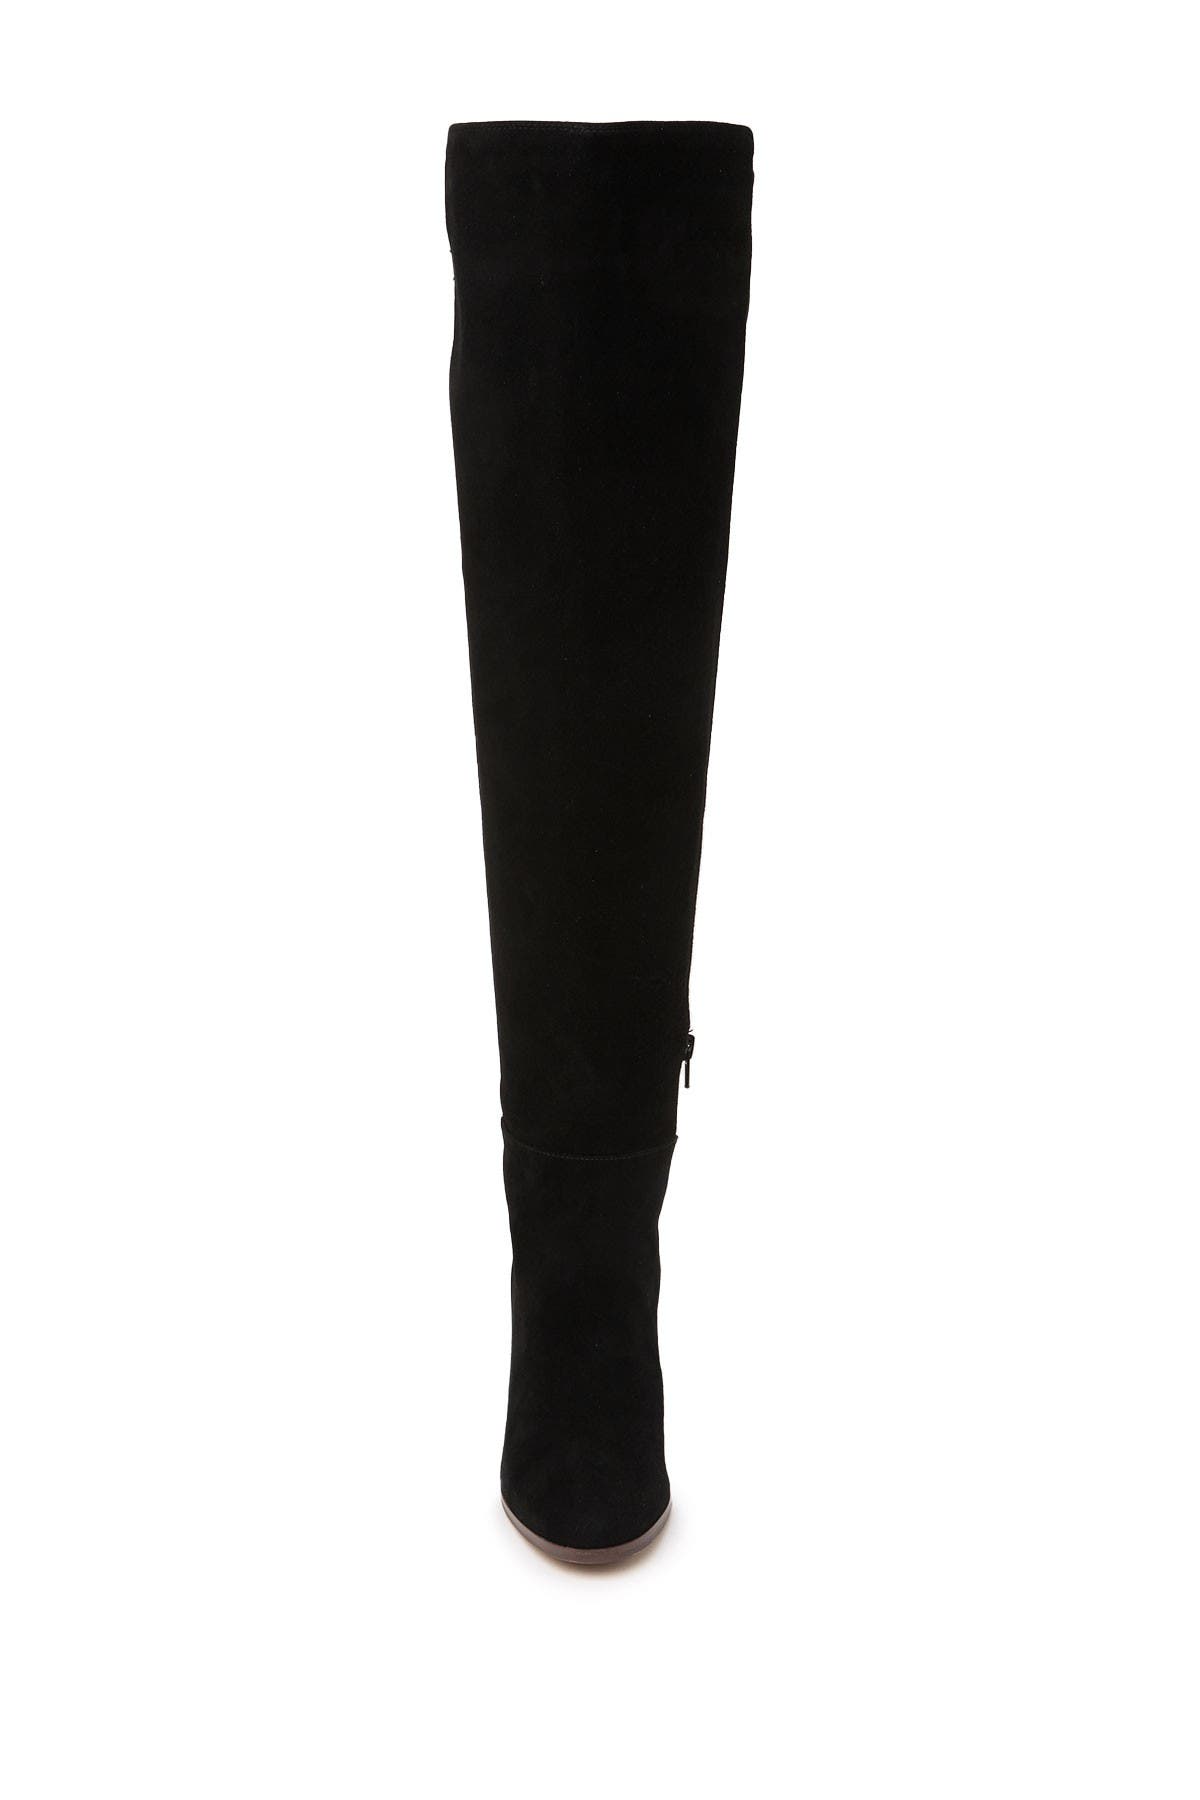 Granta Over-the-Knee Wedge Boot 